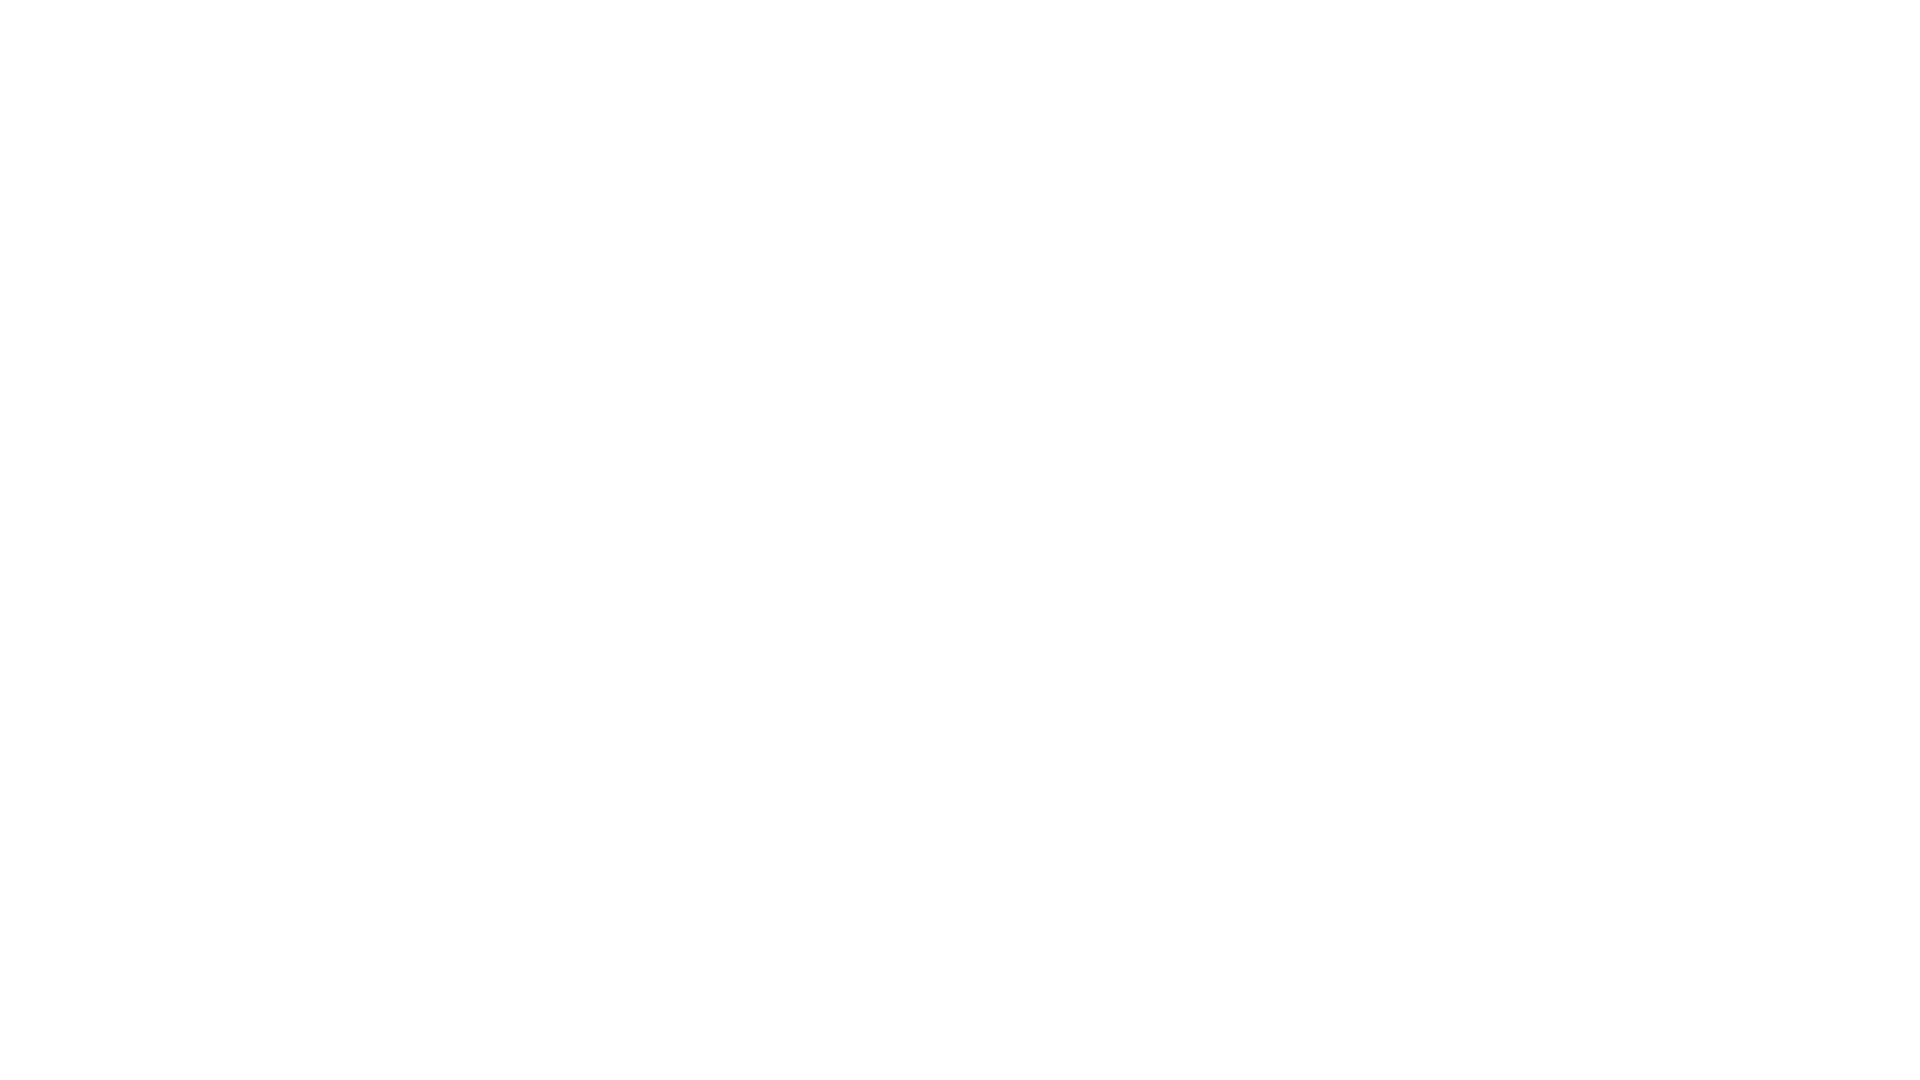 The insight